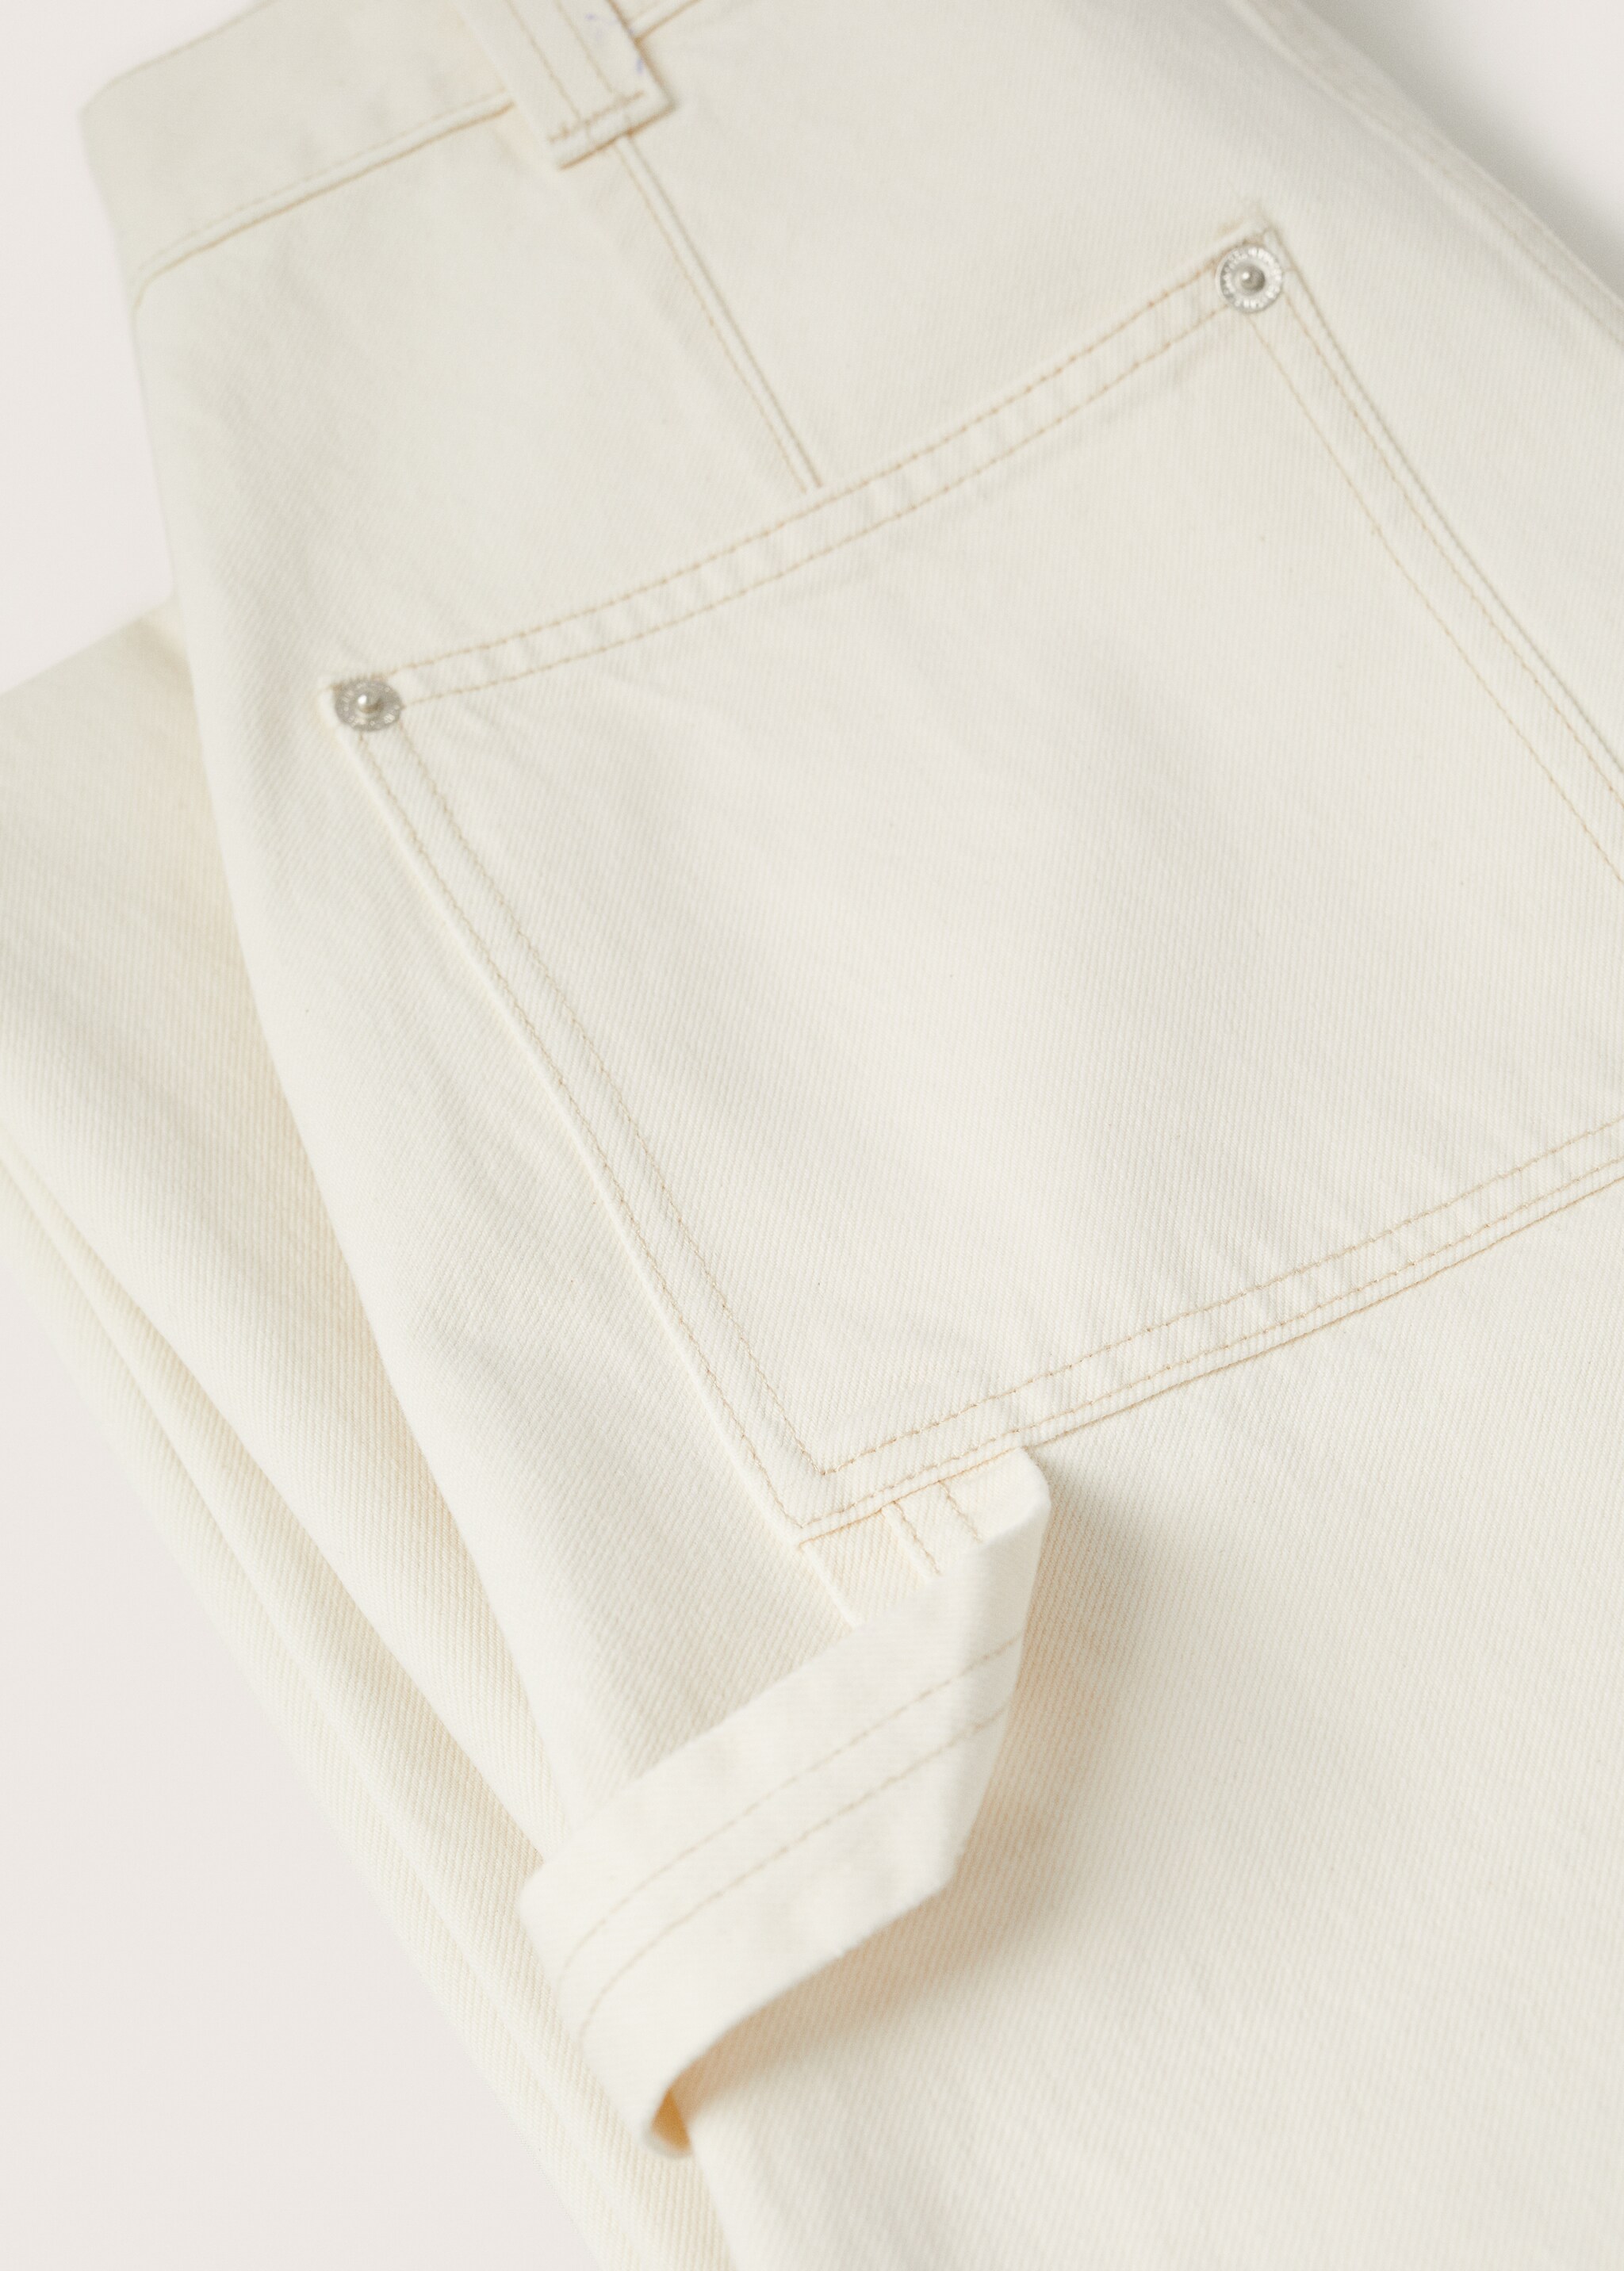 Cargo jeans - Details of the article 8